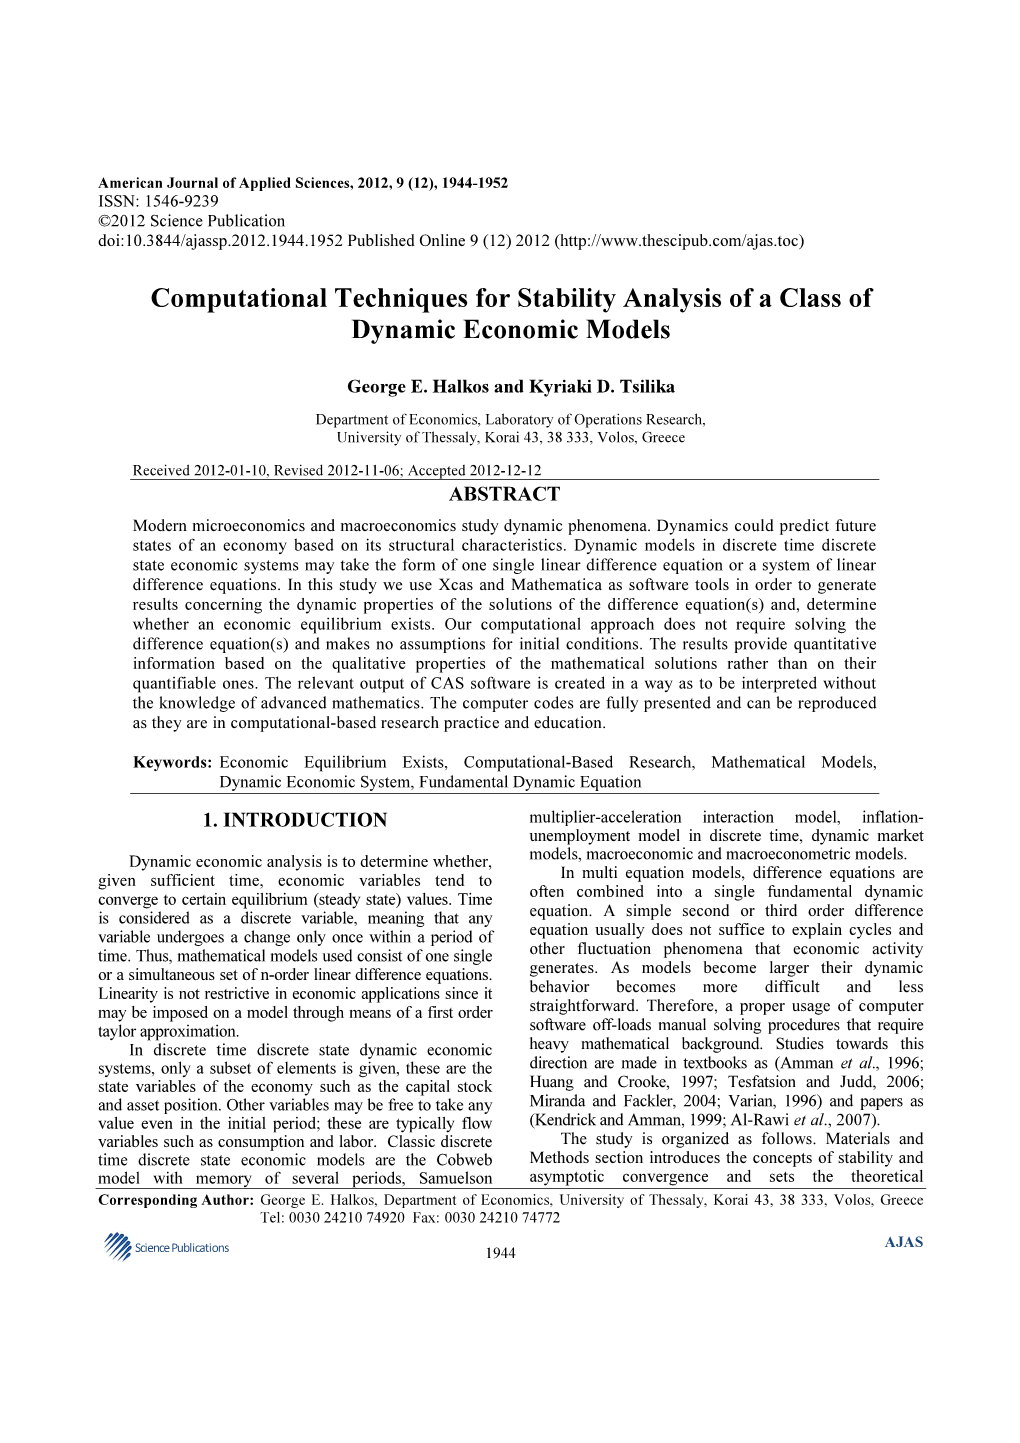 Computational Techniques for Stability Analysis of a Class of Dynamic Economic Models